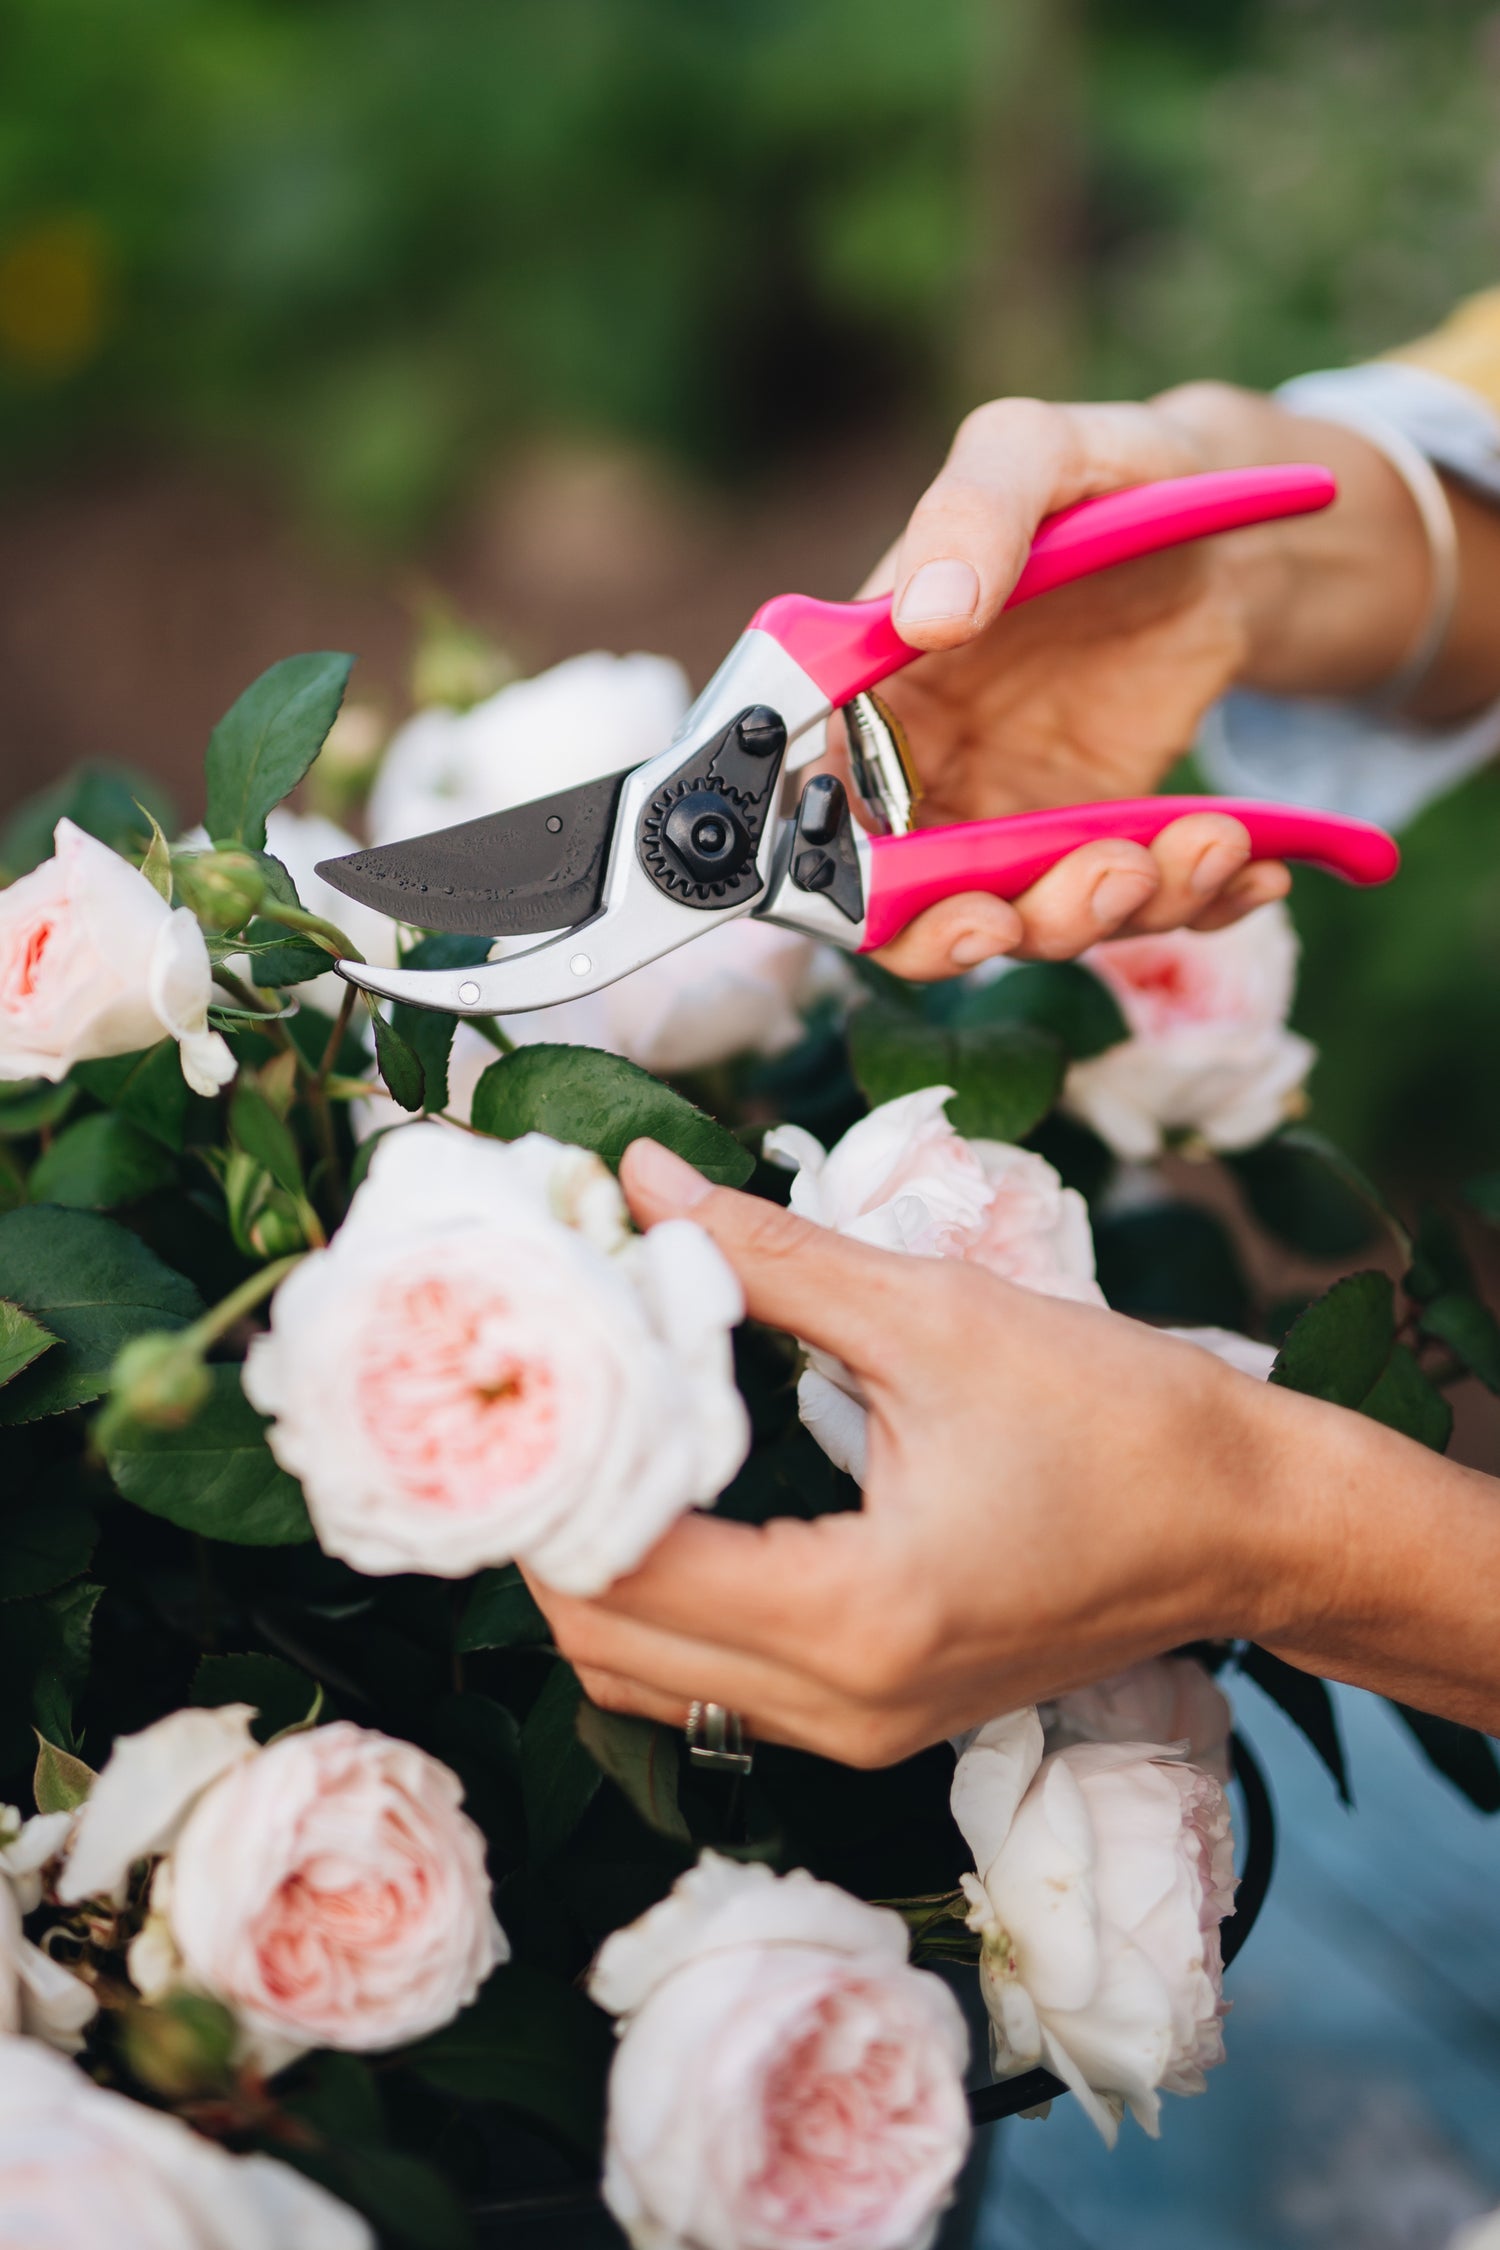 hand-holding-secateurs-with-hot-pink-handle-cutting-pink-roses